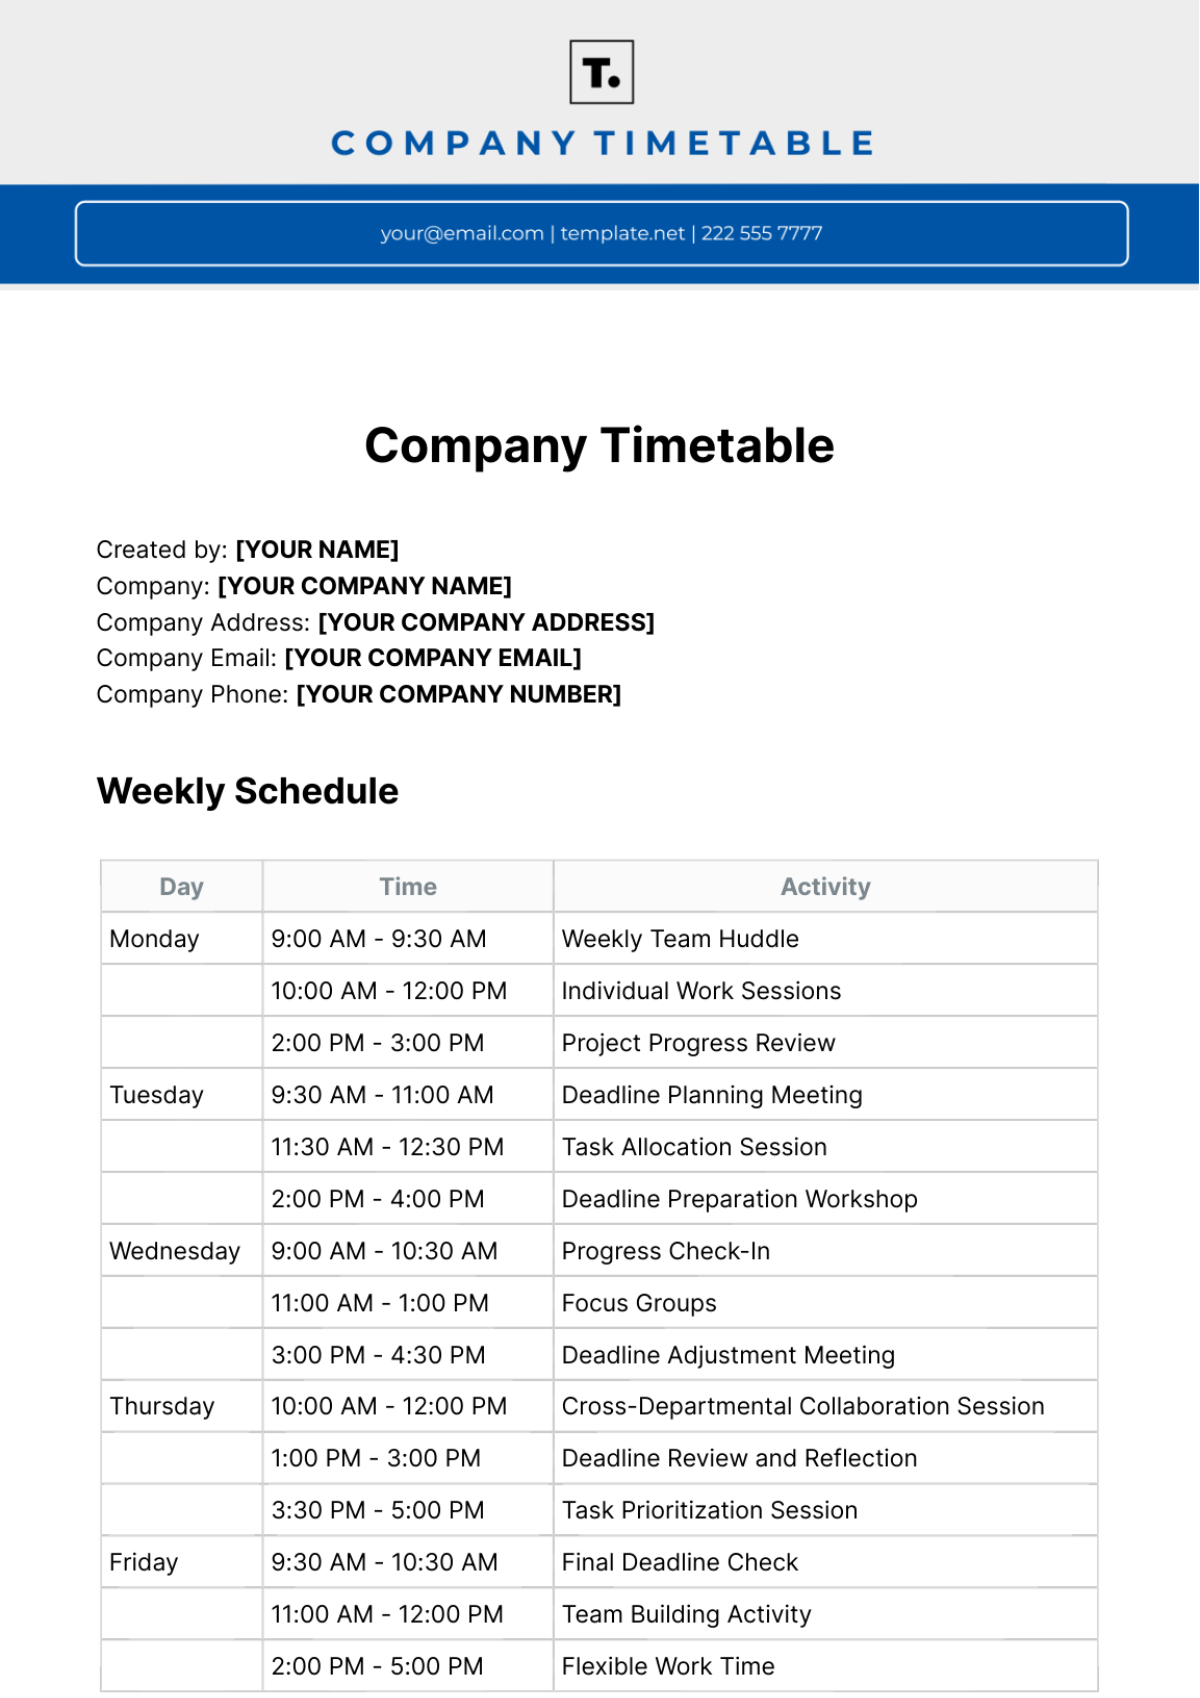 Free Company Timetable Template